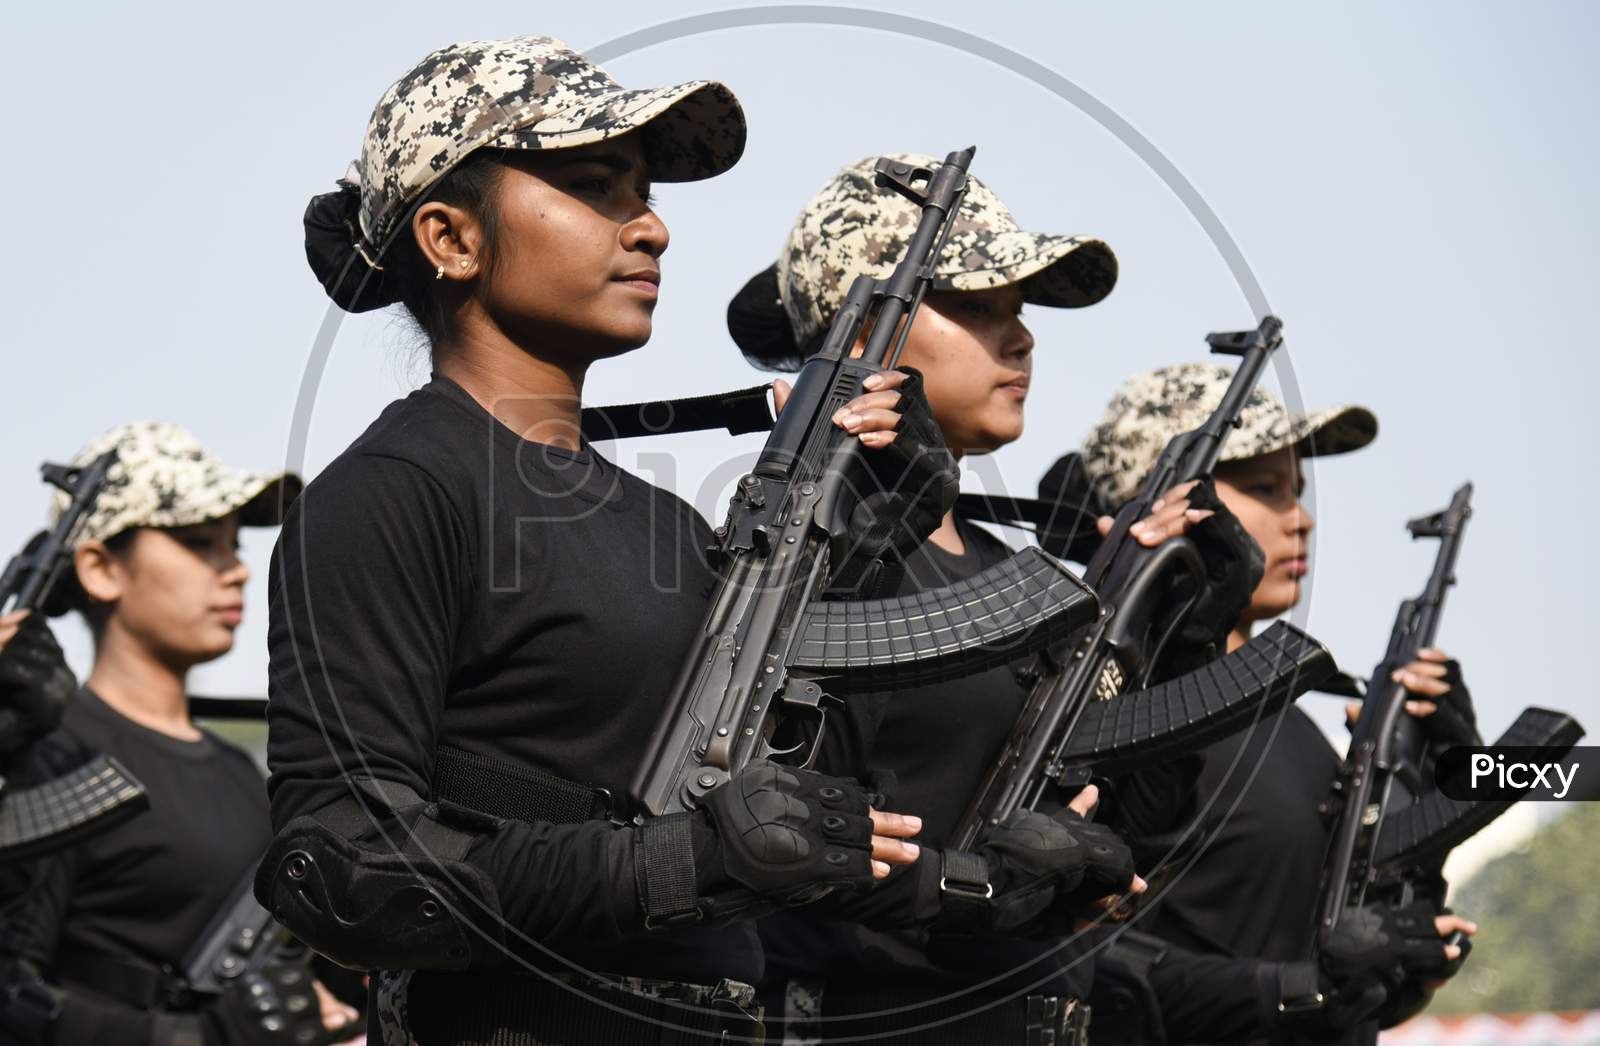 Defence Personnel Participate In The Parade During 71St Republic Day Celebrations, At Veterinary College Playground, Khanapara In Guwahati, Assam, India On 26 Jan. 2020.